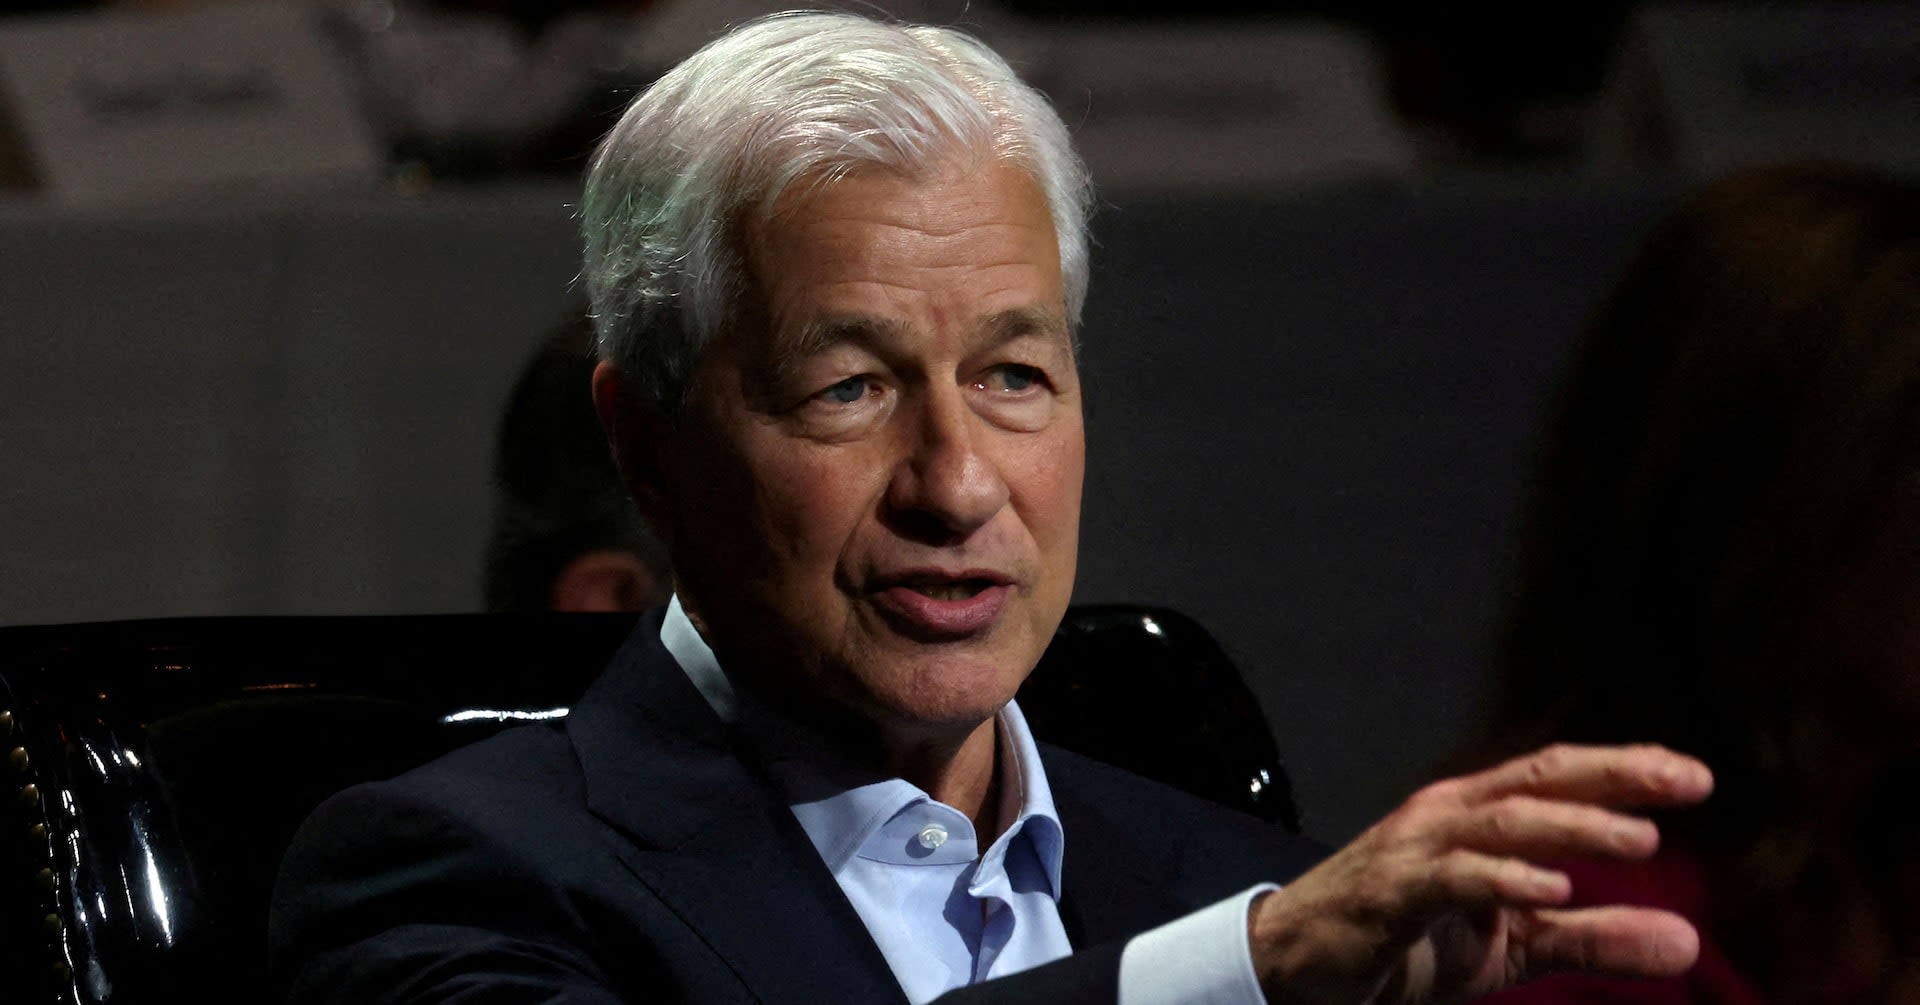 JPMorgan's Dimon says he'll "do the right thing" on succession, pushes back on CEO-chairman split